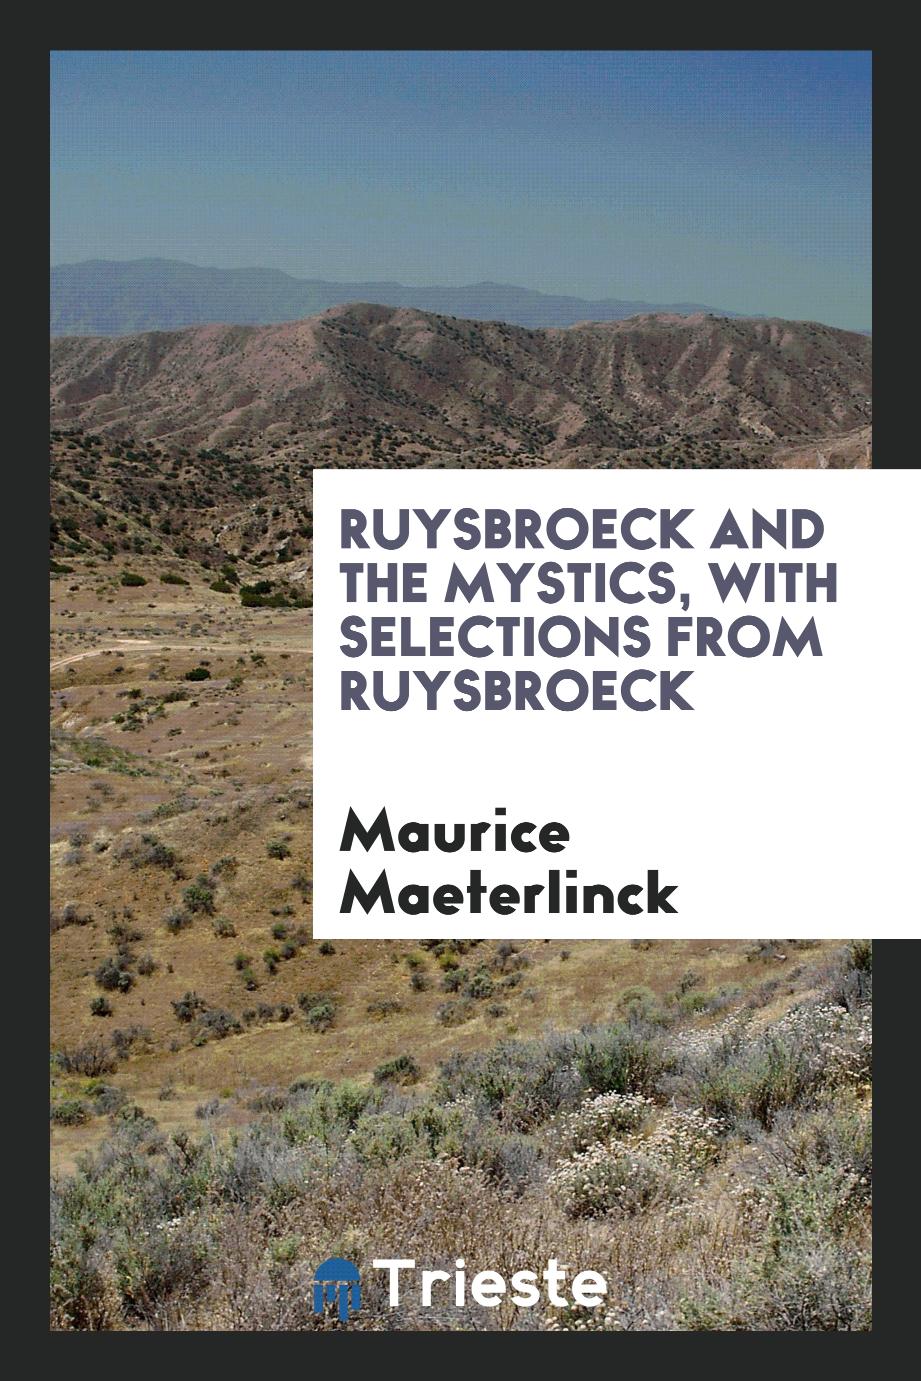 Ruysbroeck and the Mystics, with Selections from Ruysbroeck